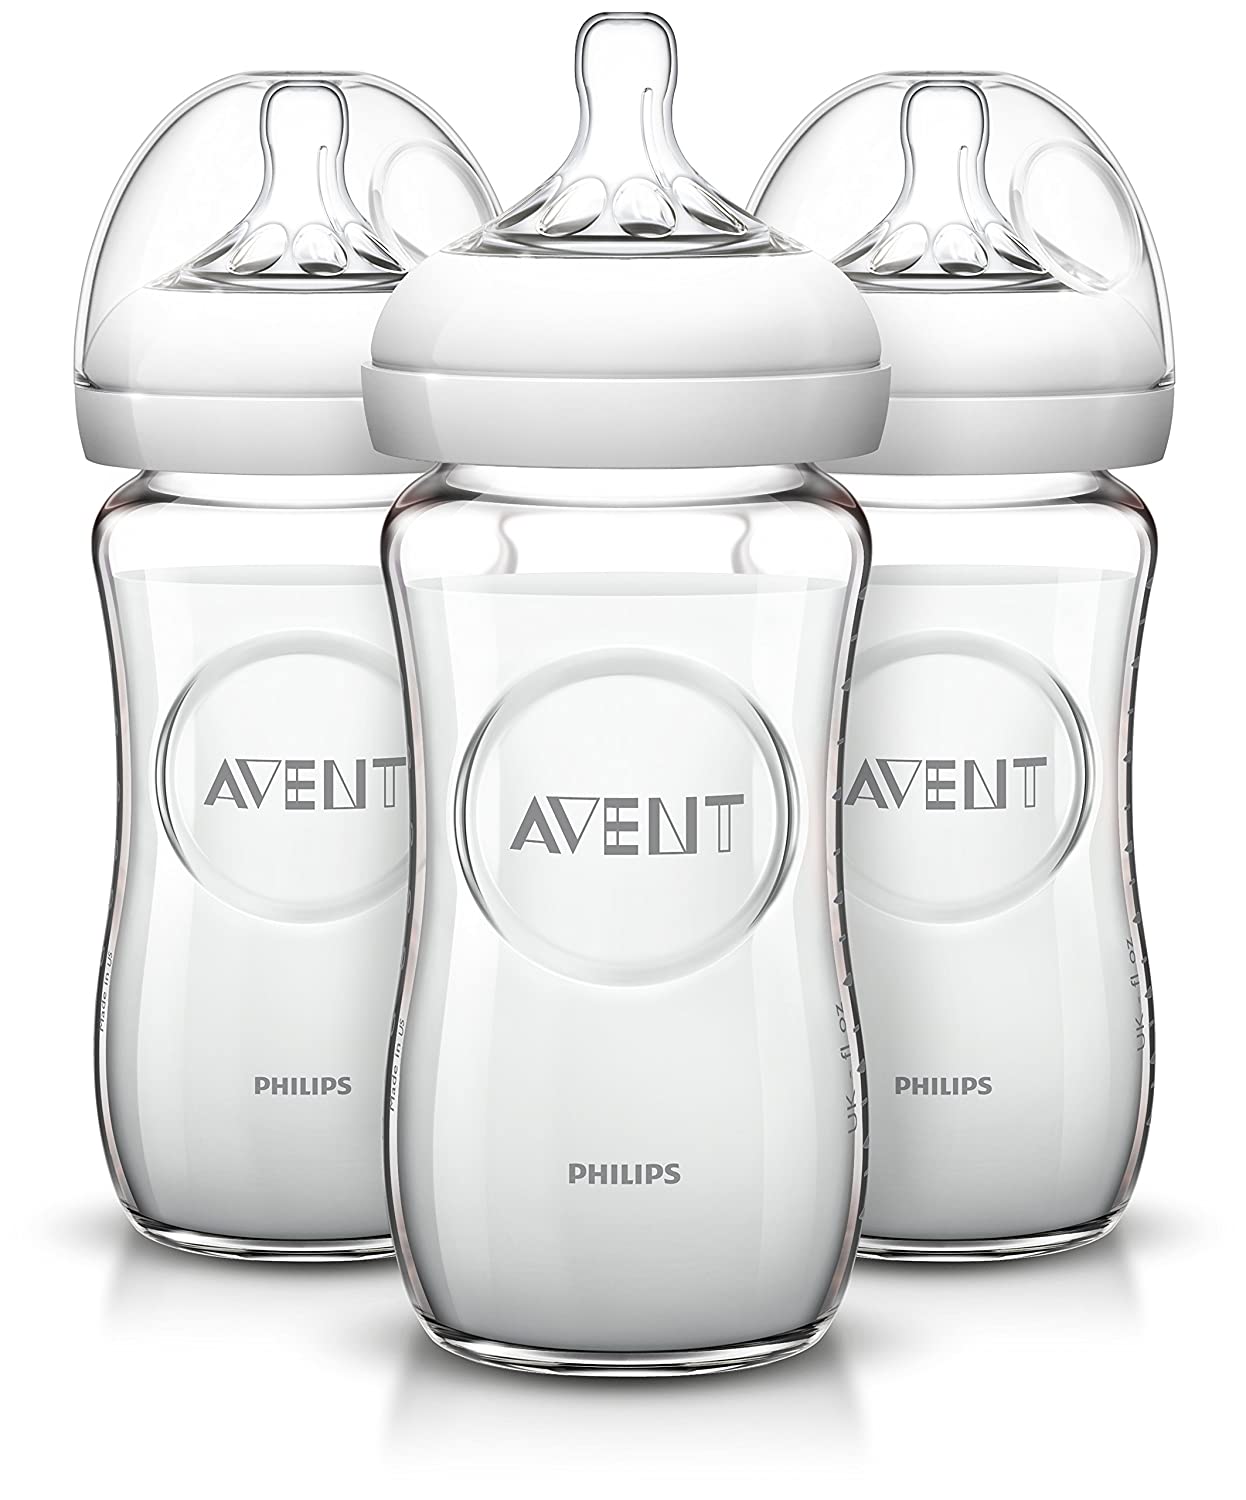 Top 6 Best Glass Baby Bottles Reviews in 2022 2